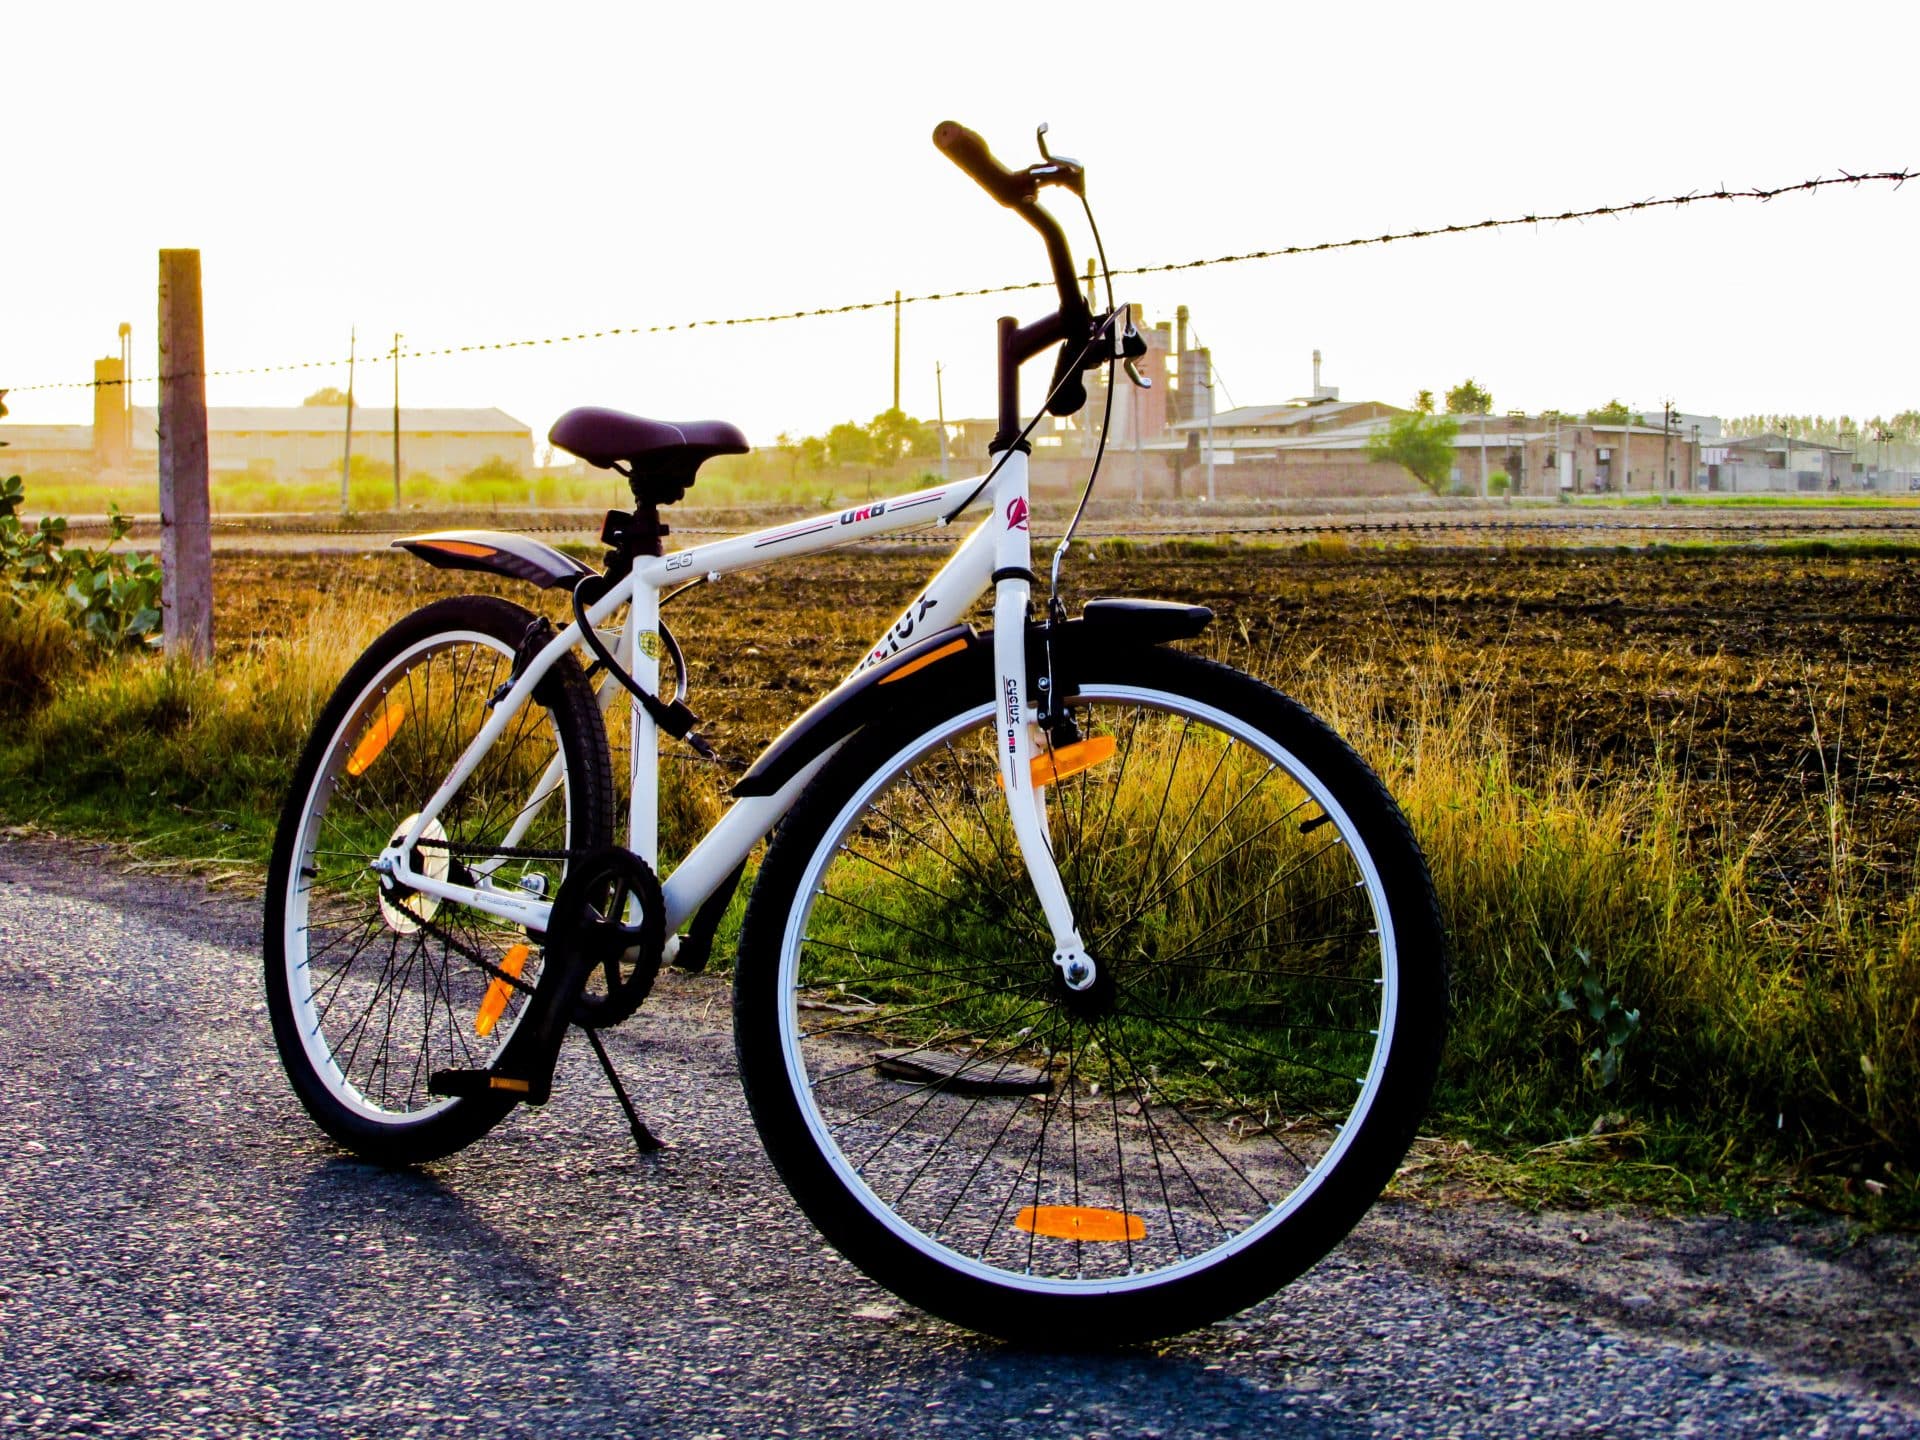 Bicycle on road representing a personal injury claim